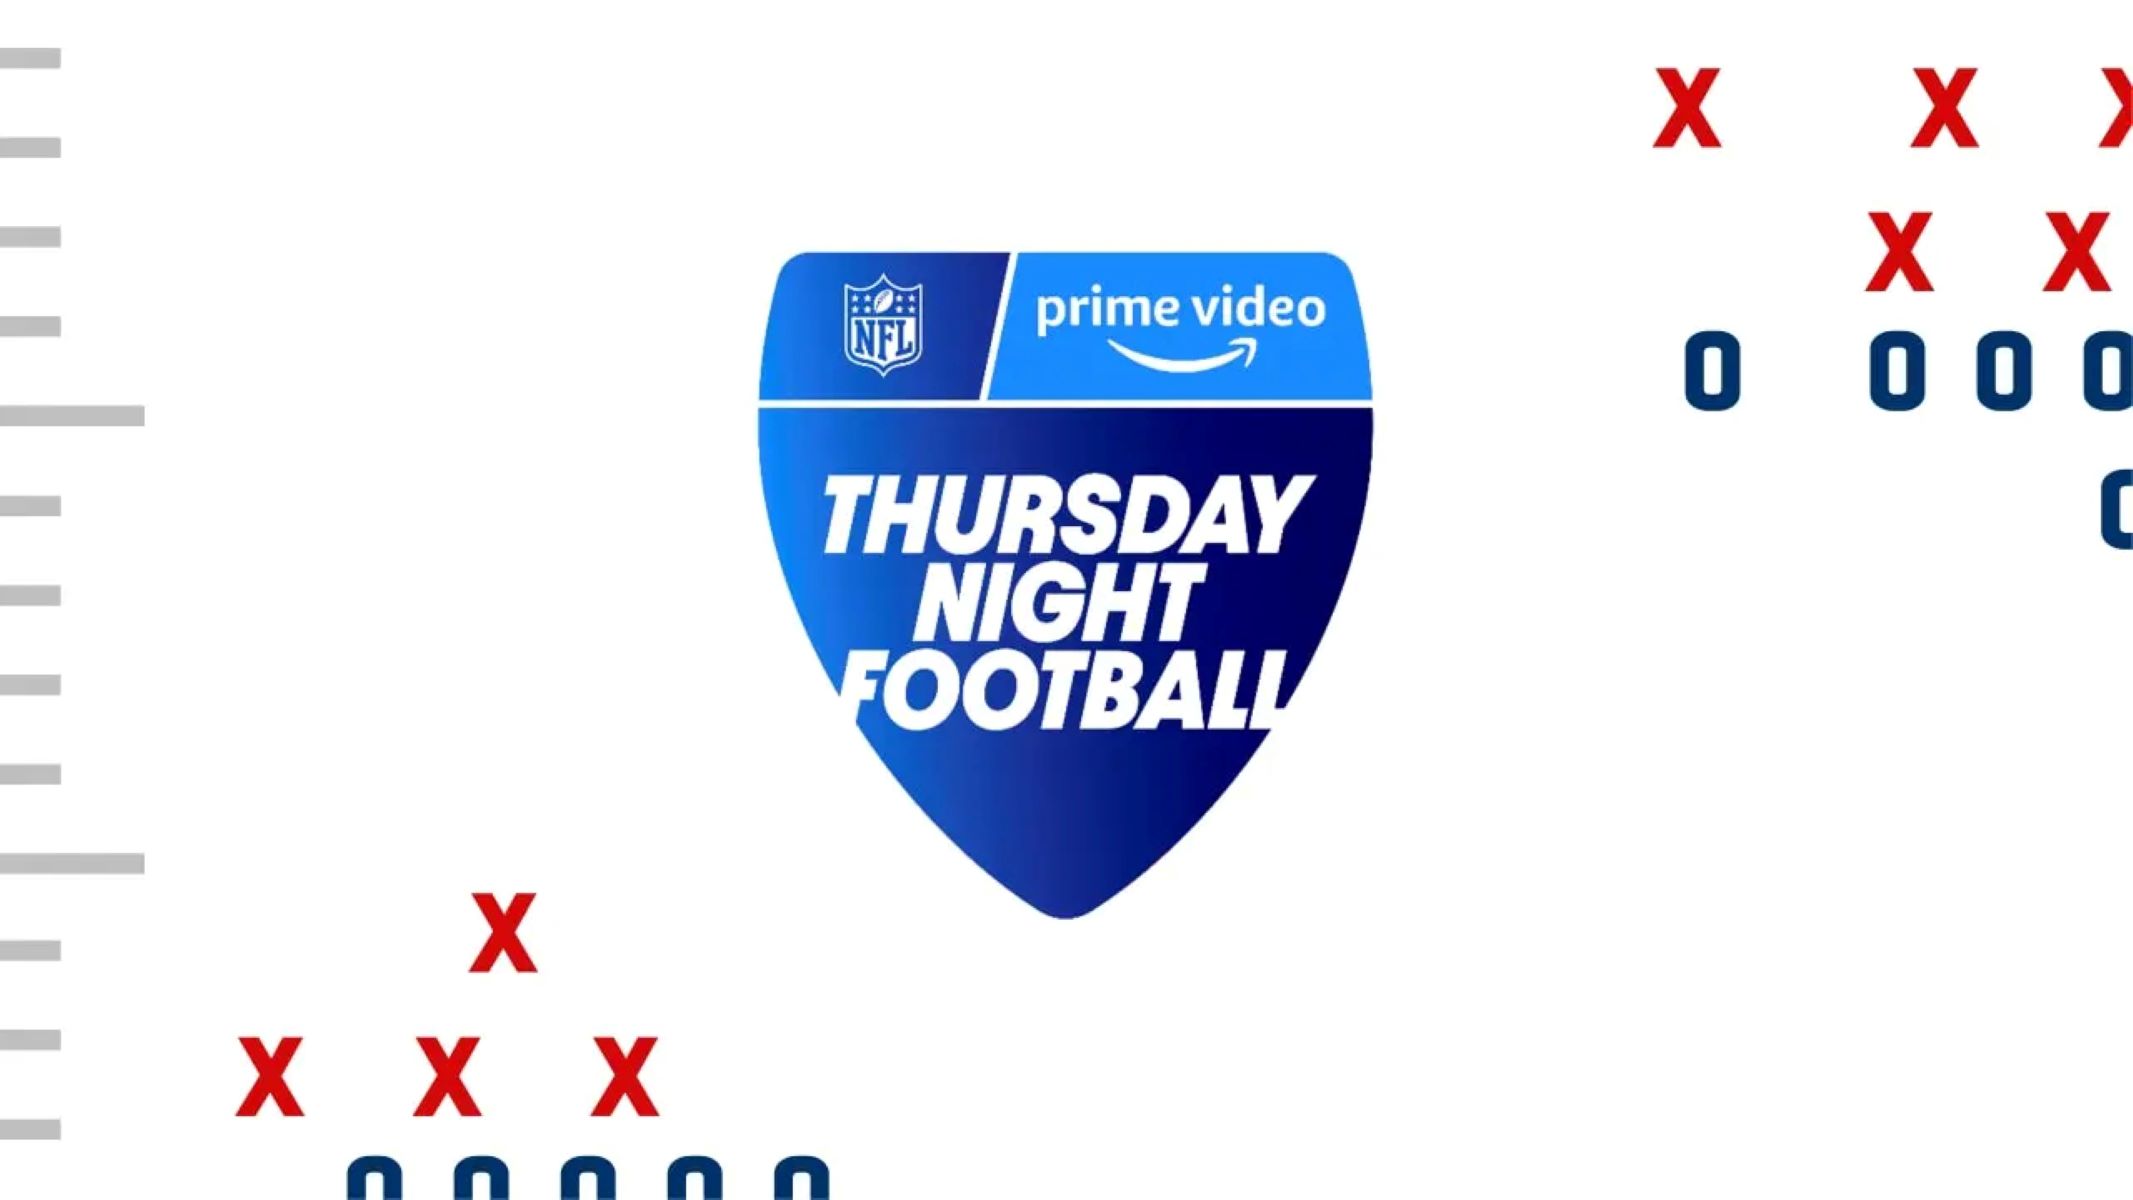 How To Watch NFL Network On Amazon Prime